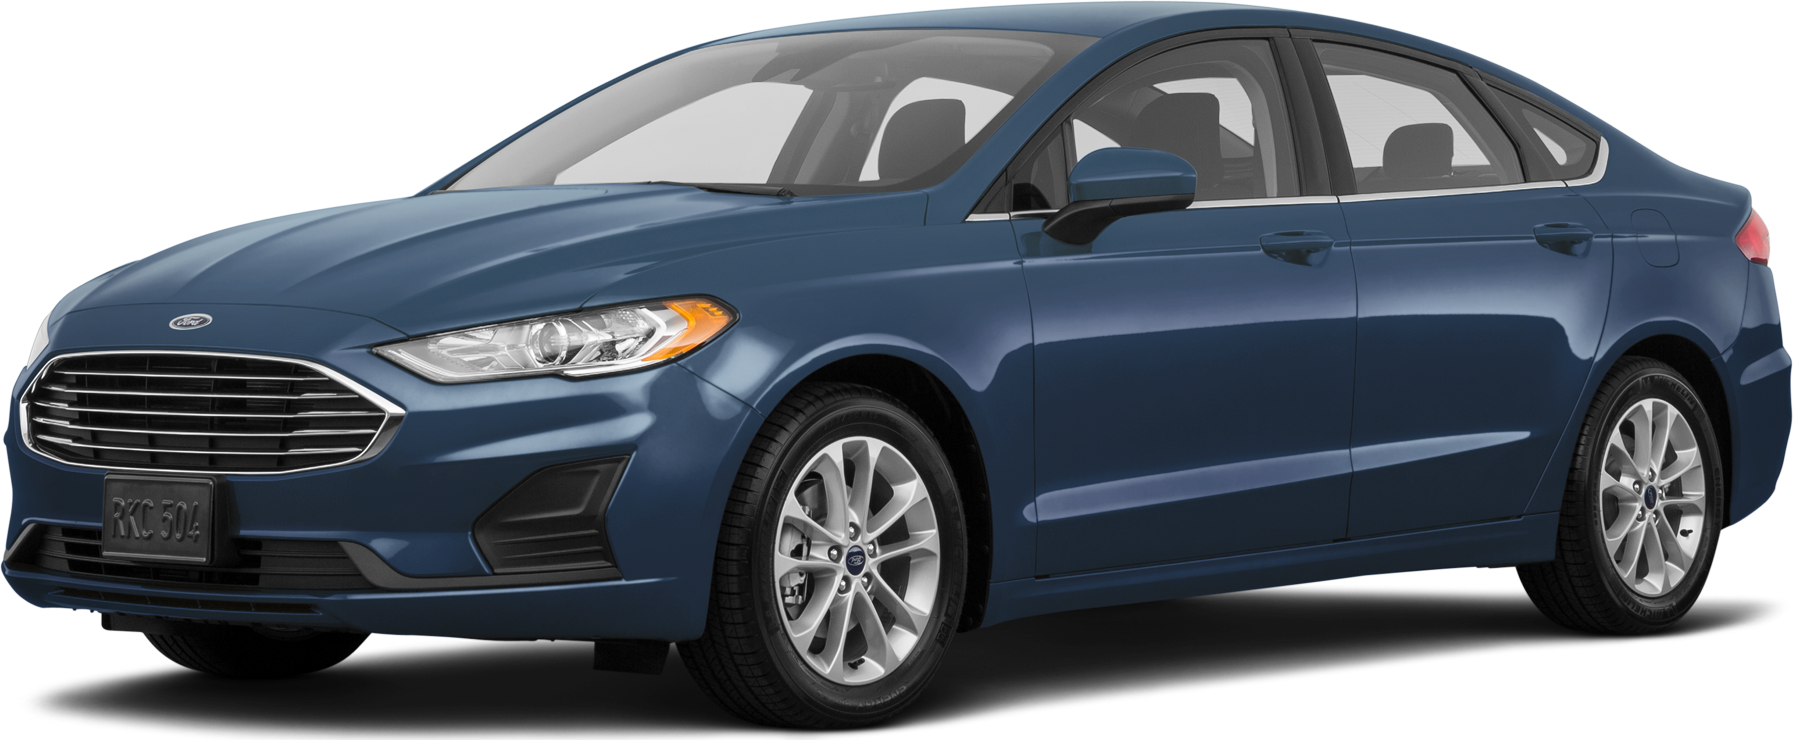 2019 Ford Fusion Price, Value, Ratings & Reviews